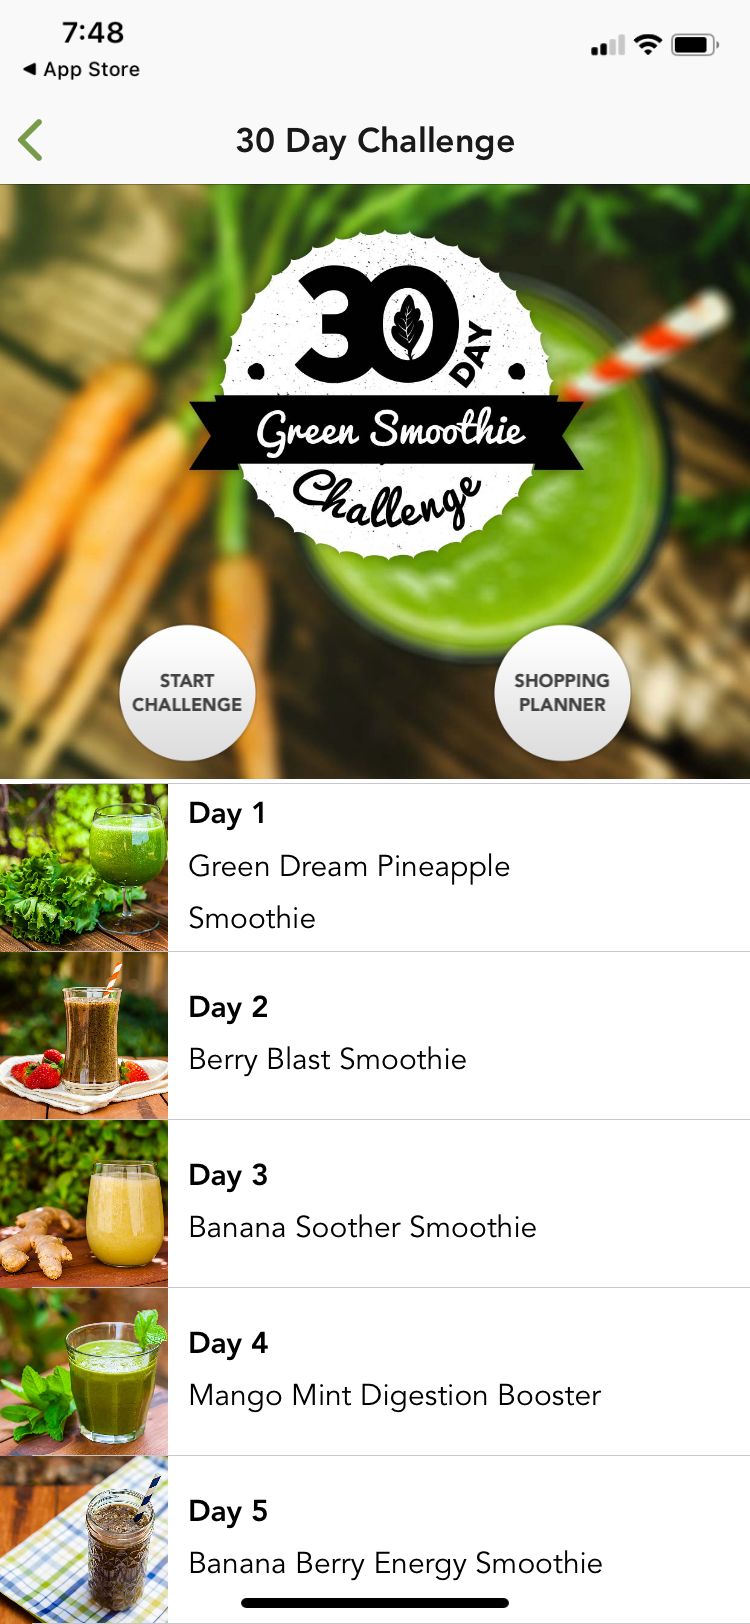 Green Smoothies app 30 day challenge 